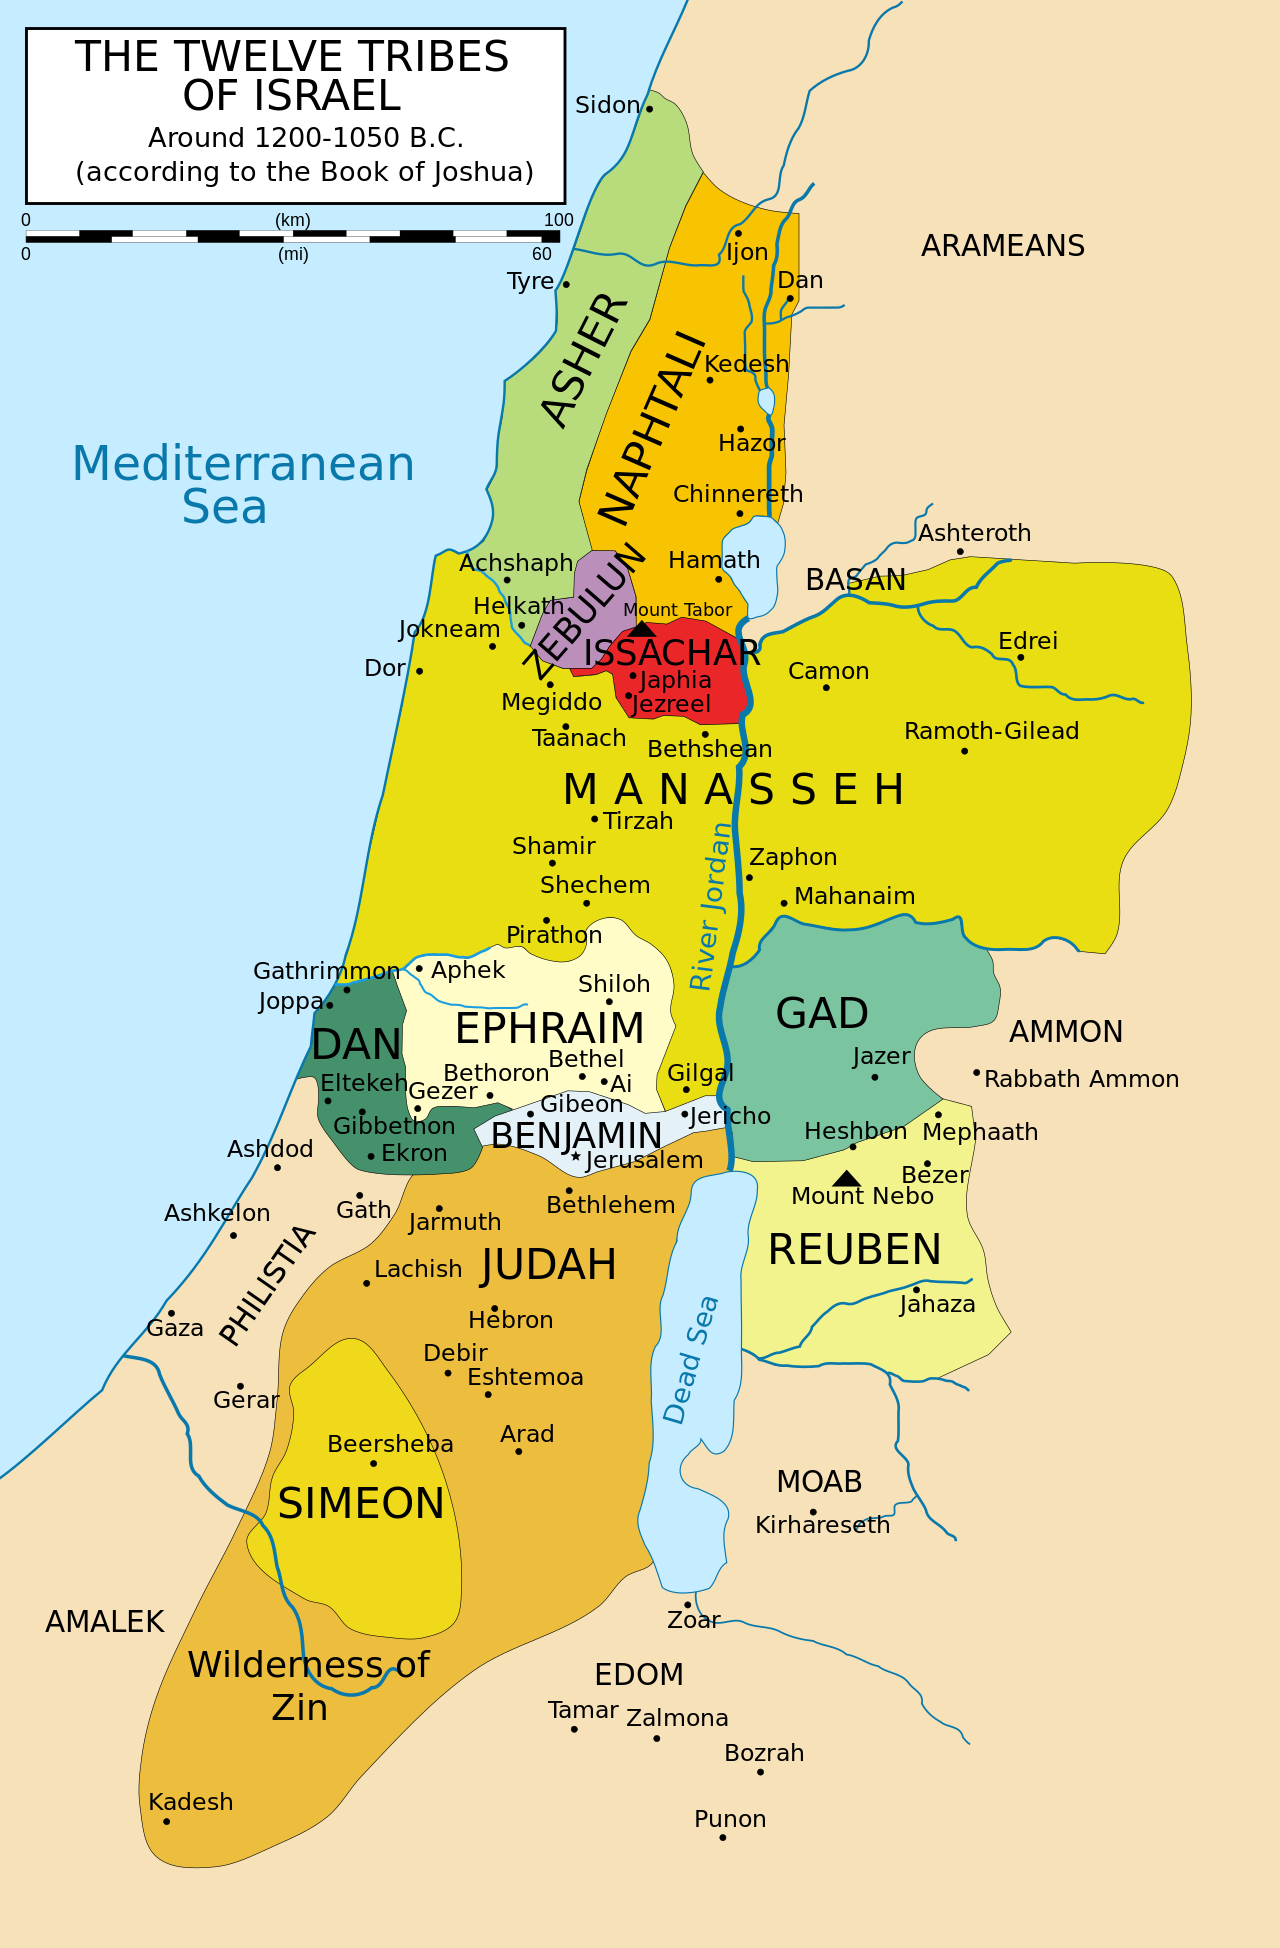 Map of the twelve tribes of Israel according to the Book of Joshua